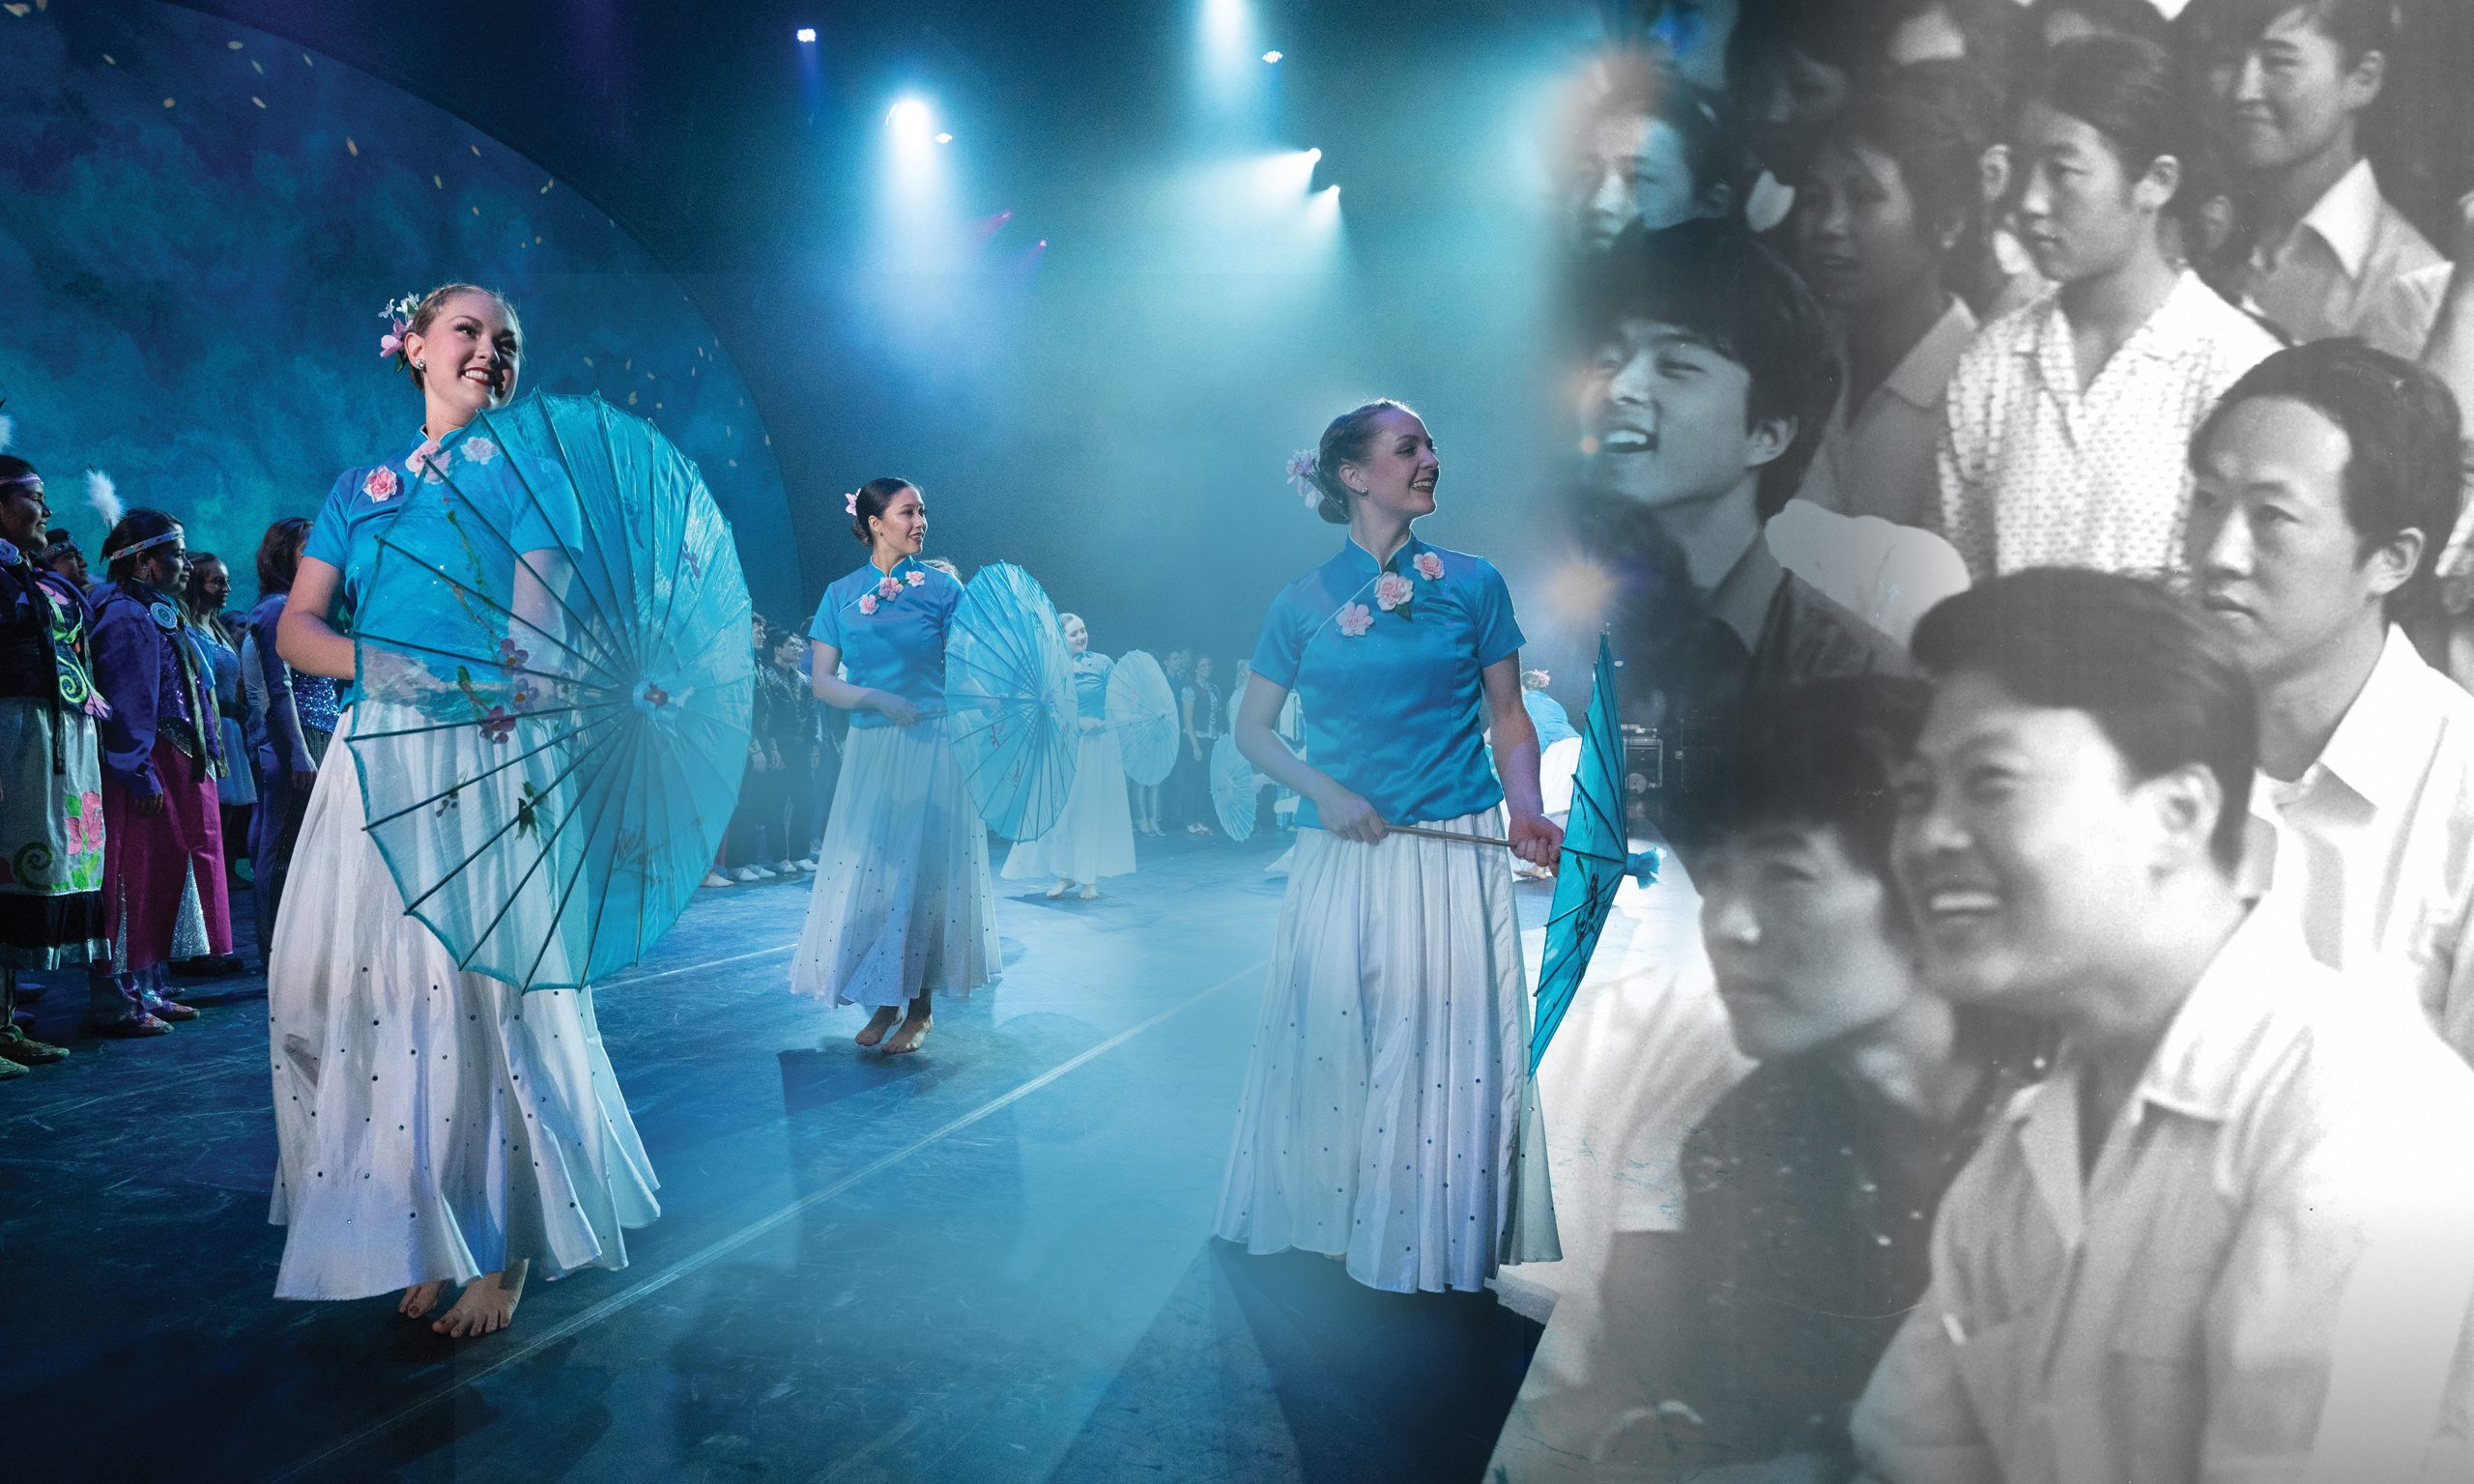 A composite image of two images fading into each other. The first image features BYU Student performers in China-inspired light blue shirts and white skirts, holding blue Chinese umbrellas. The second image is black and white and shows an audience in China.